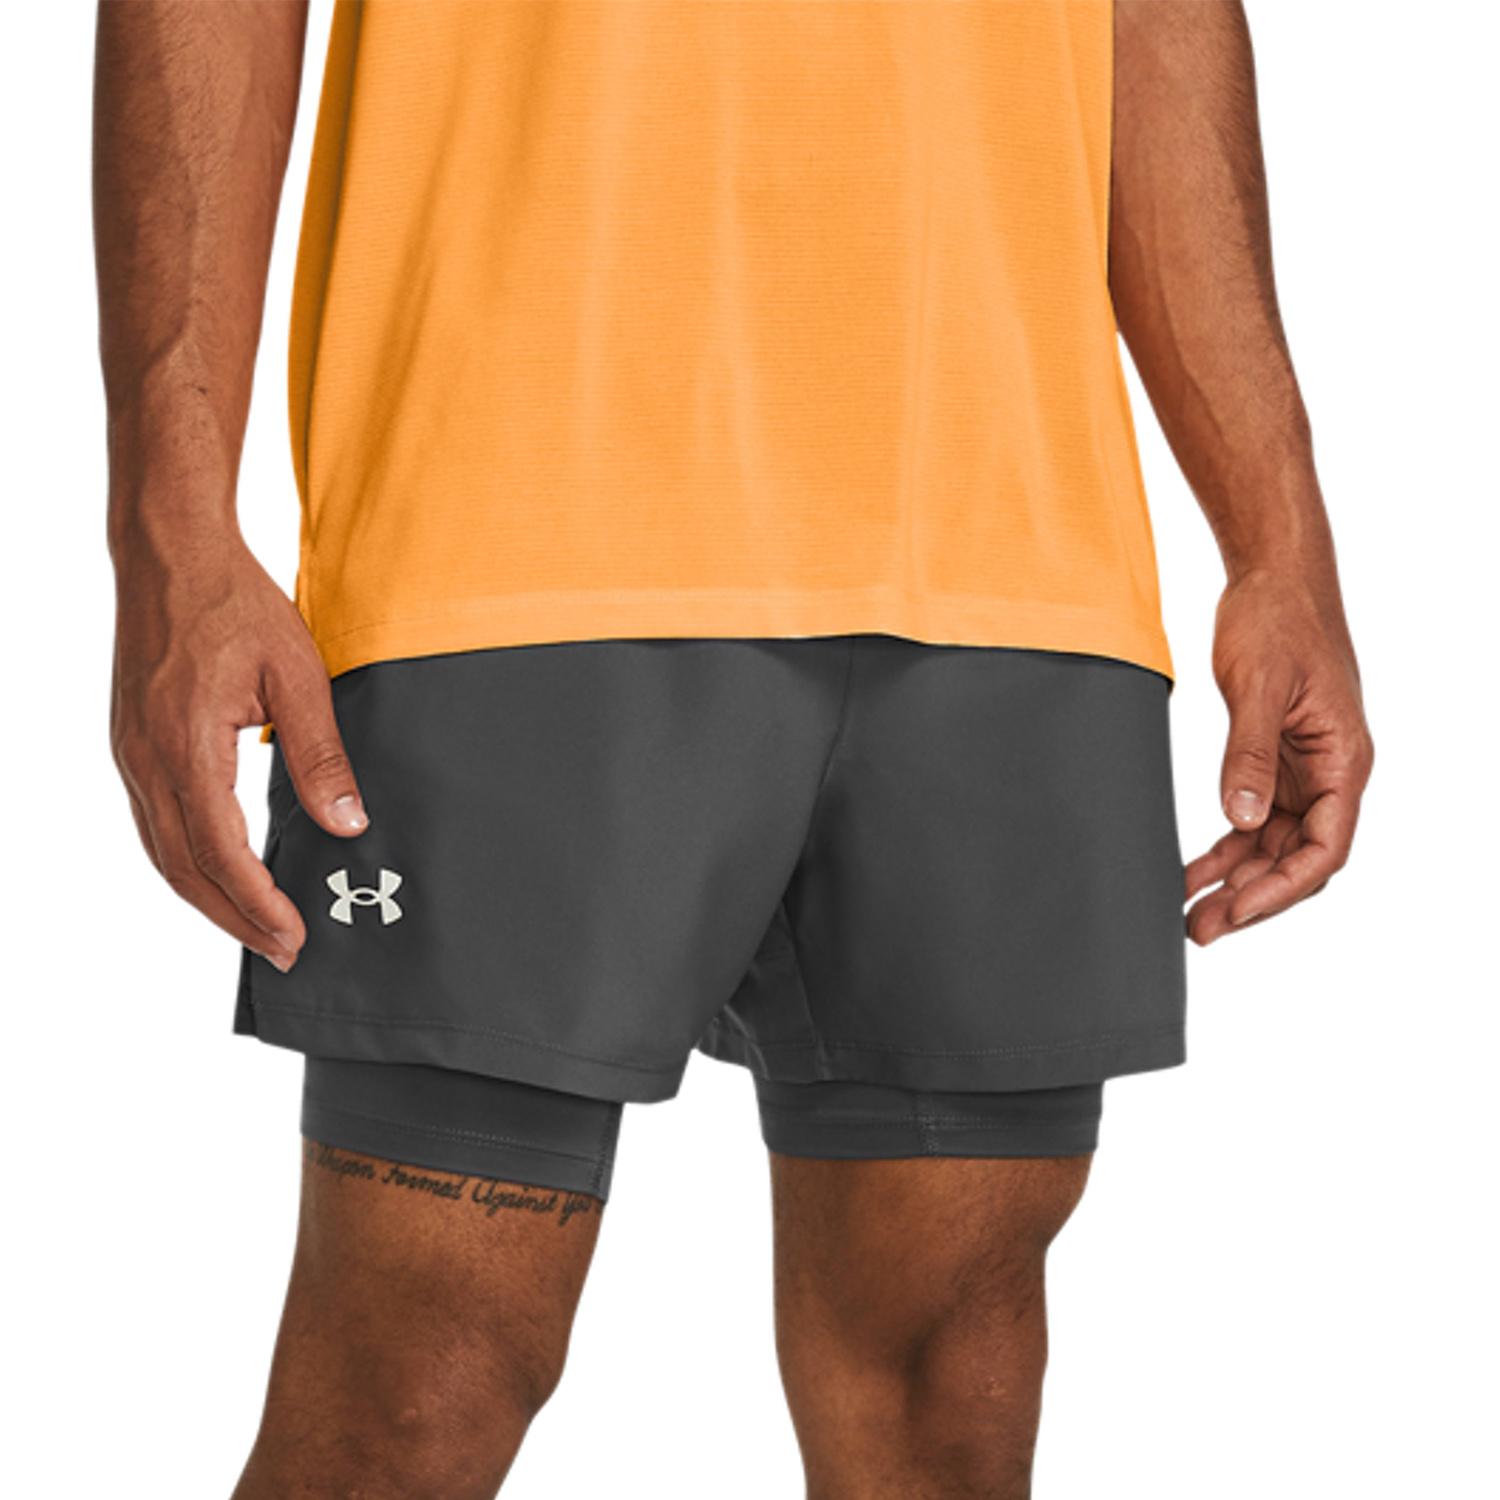 Under Armour Launch 5in 2 in 1 Shorts - Castlerock/Reflective